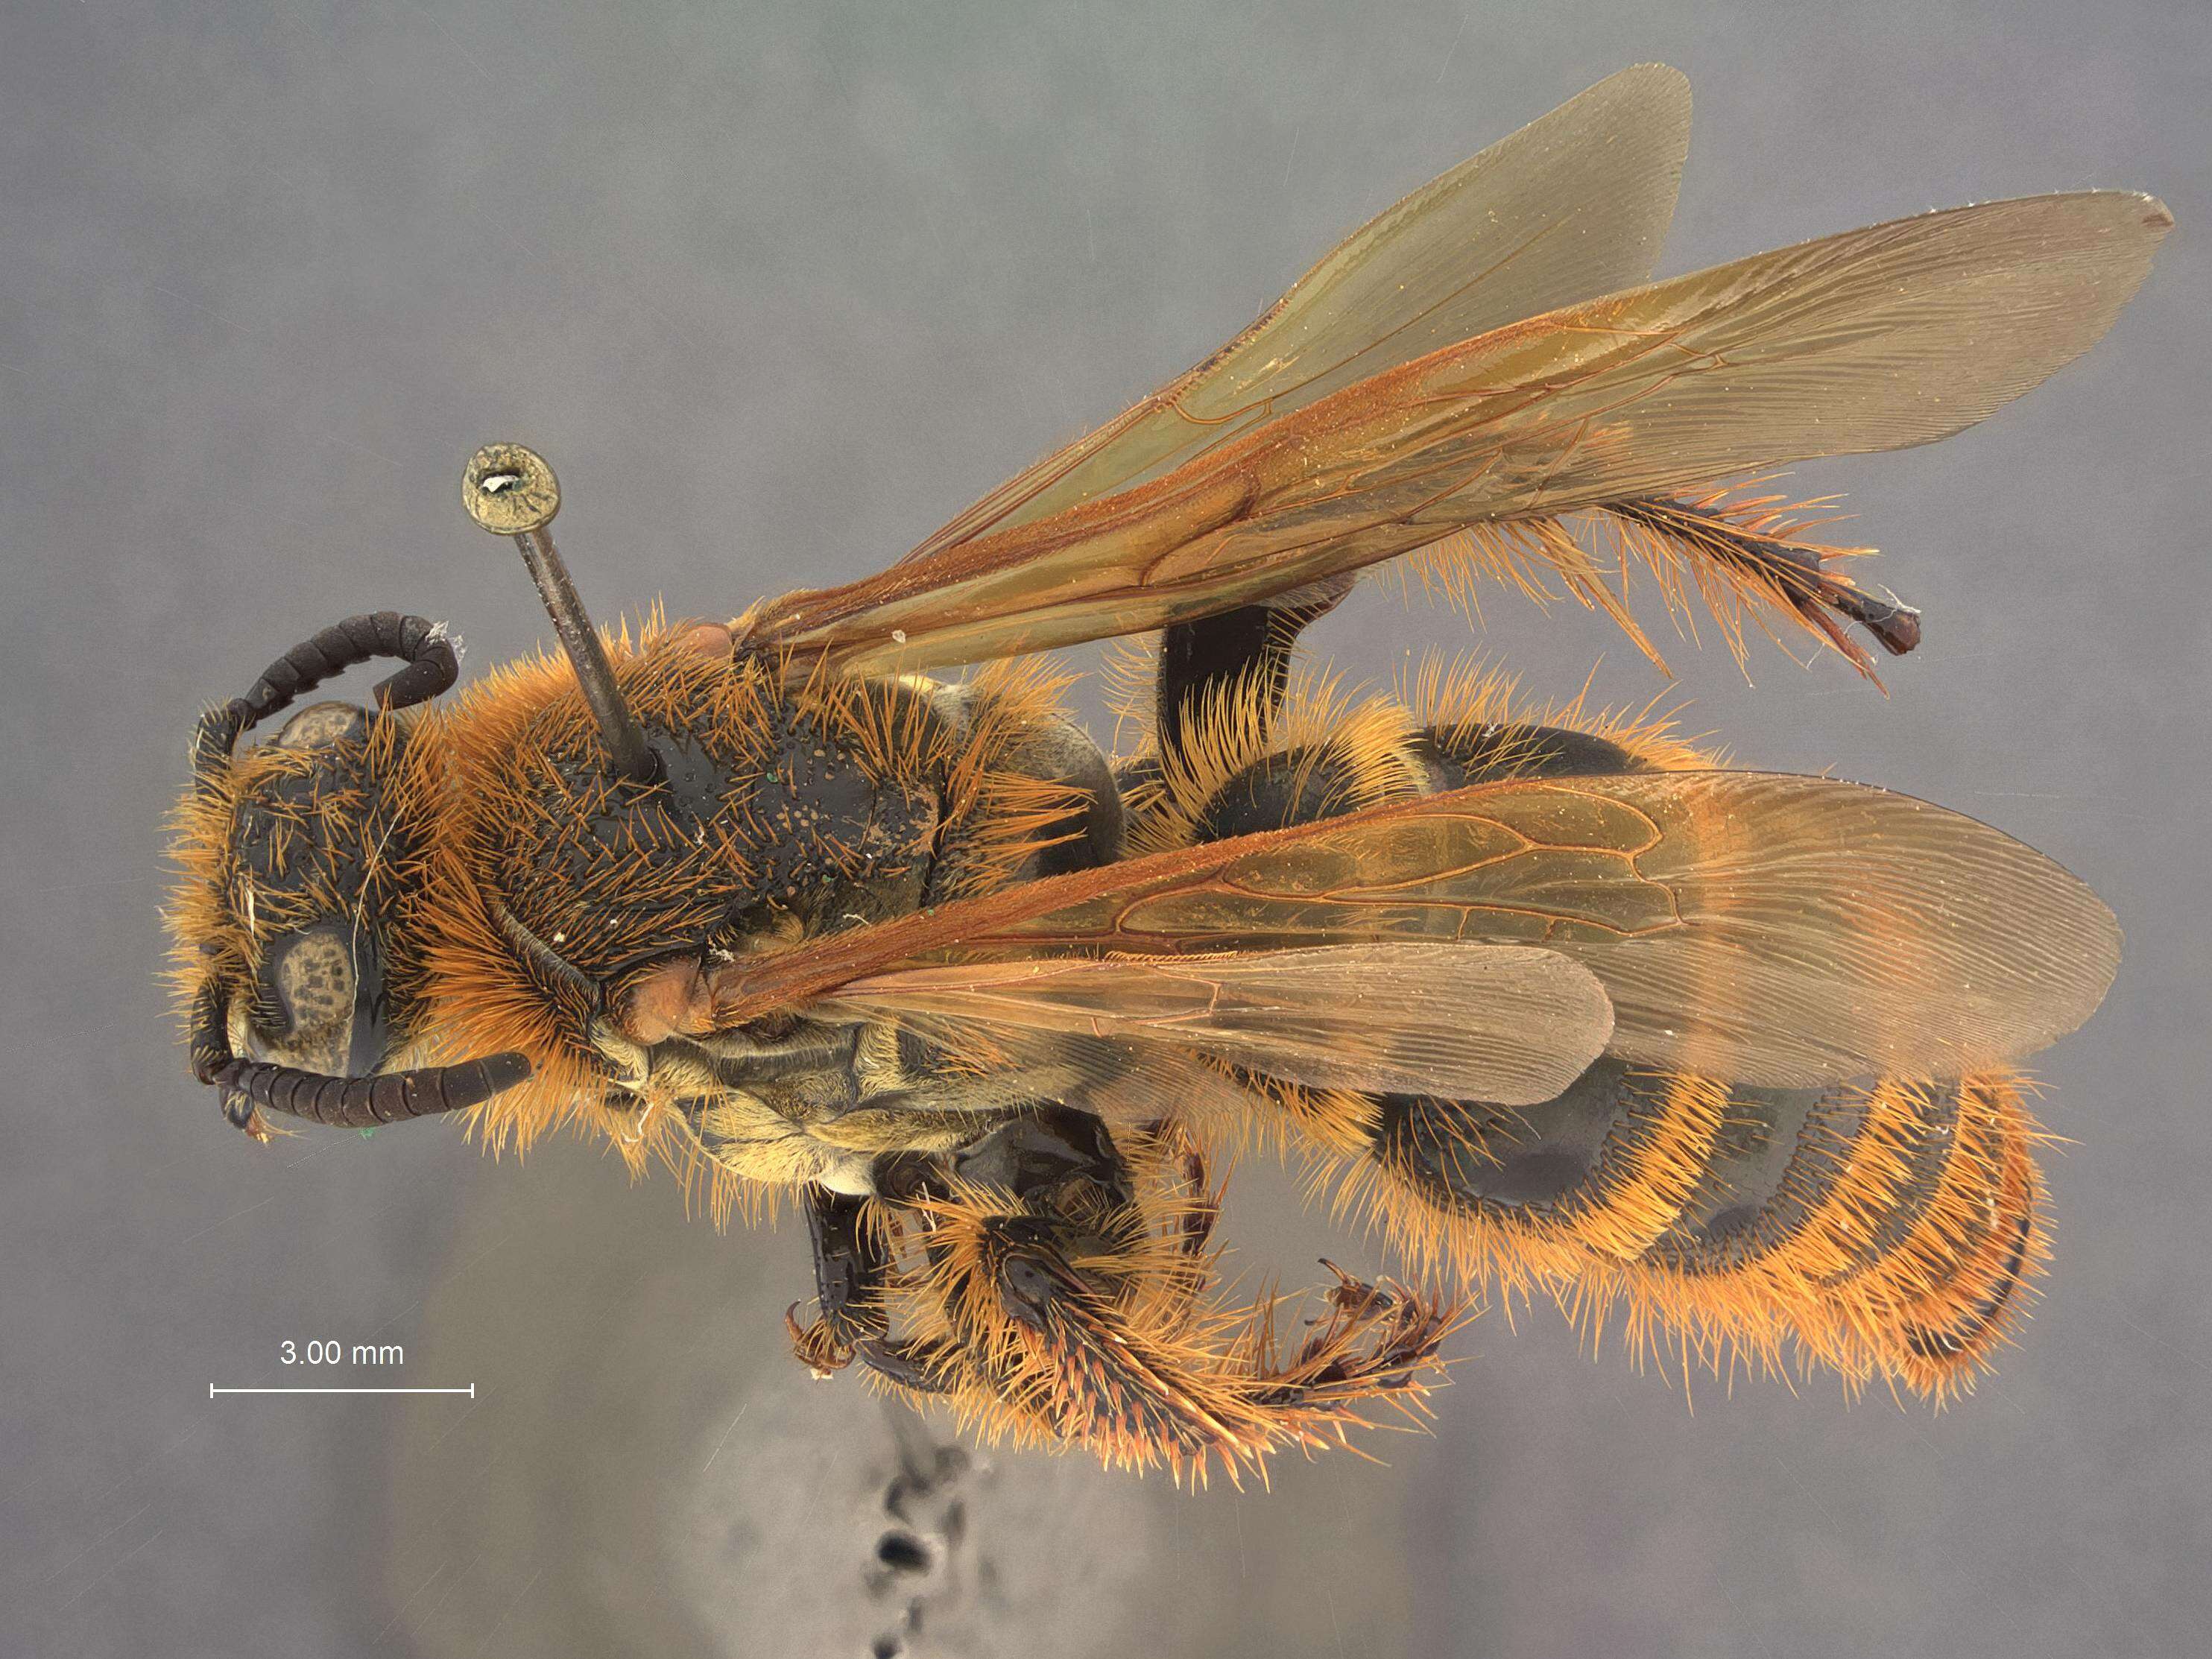 Image of scoliid wasps